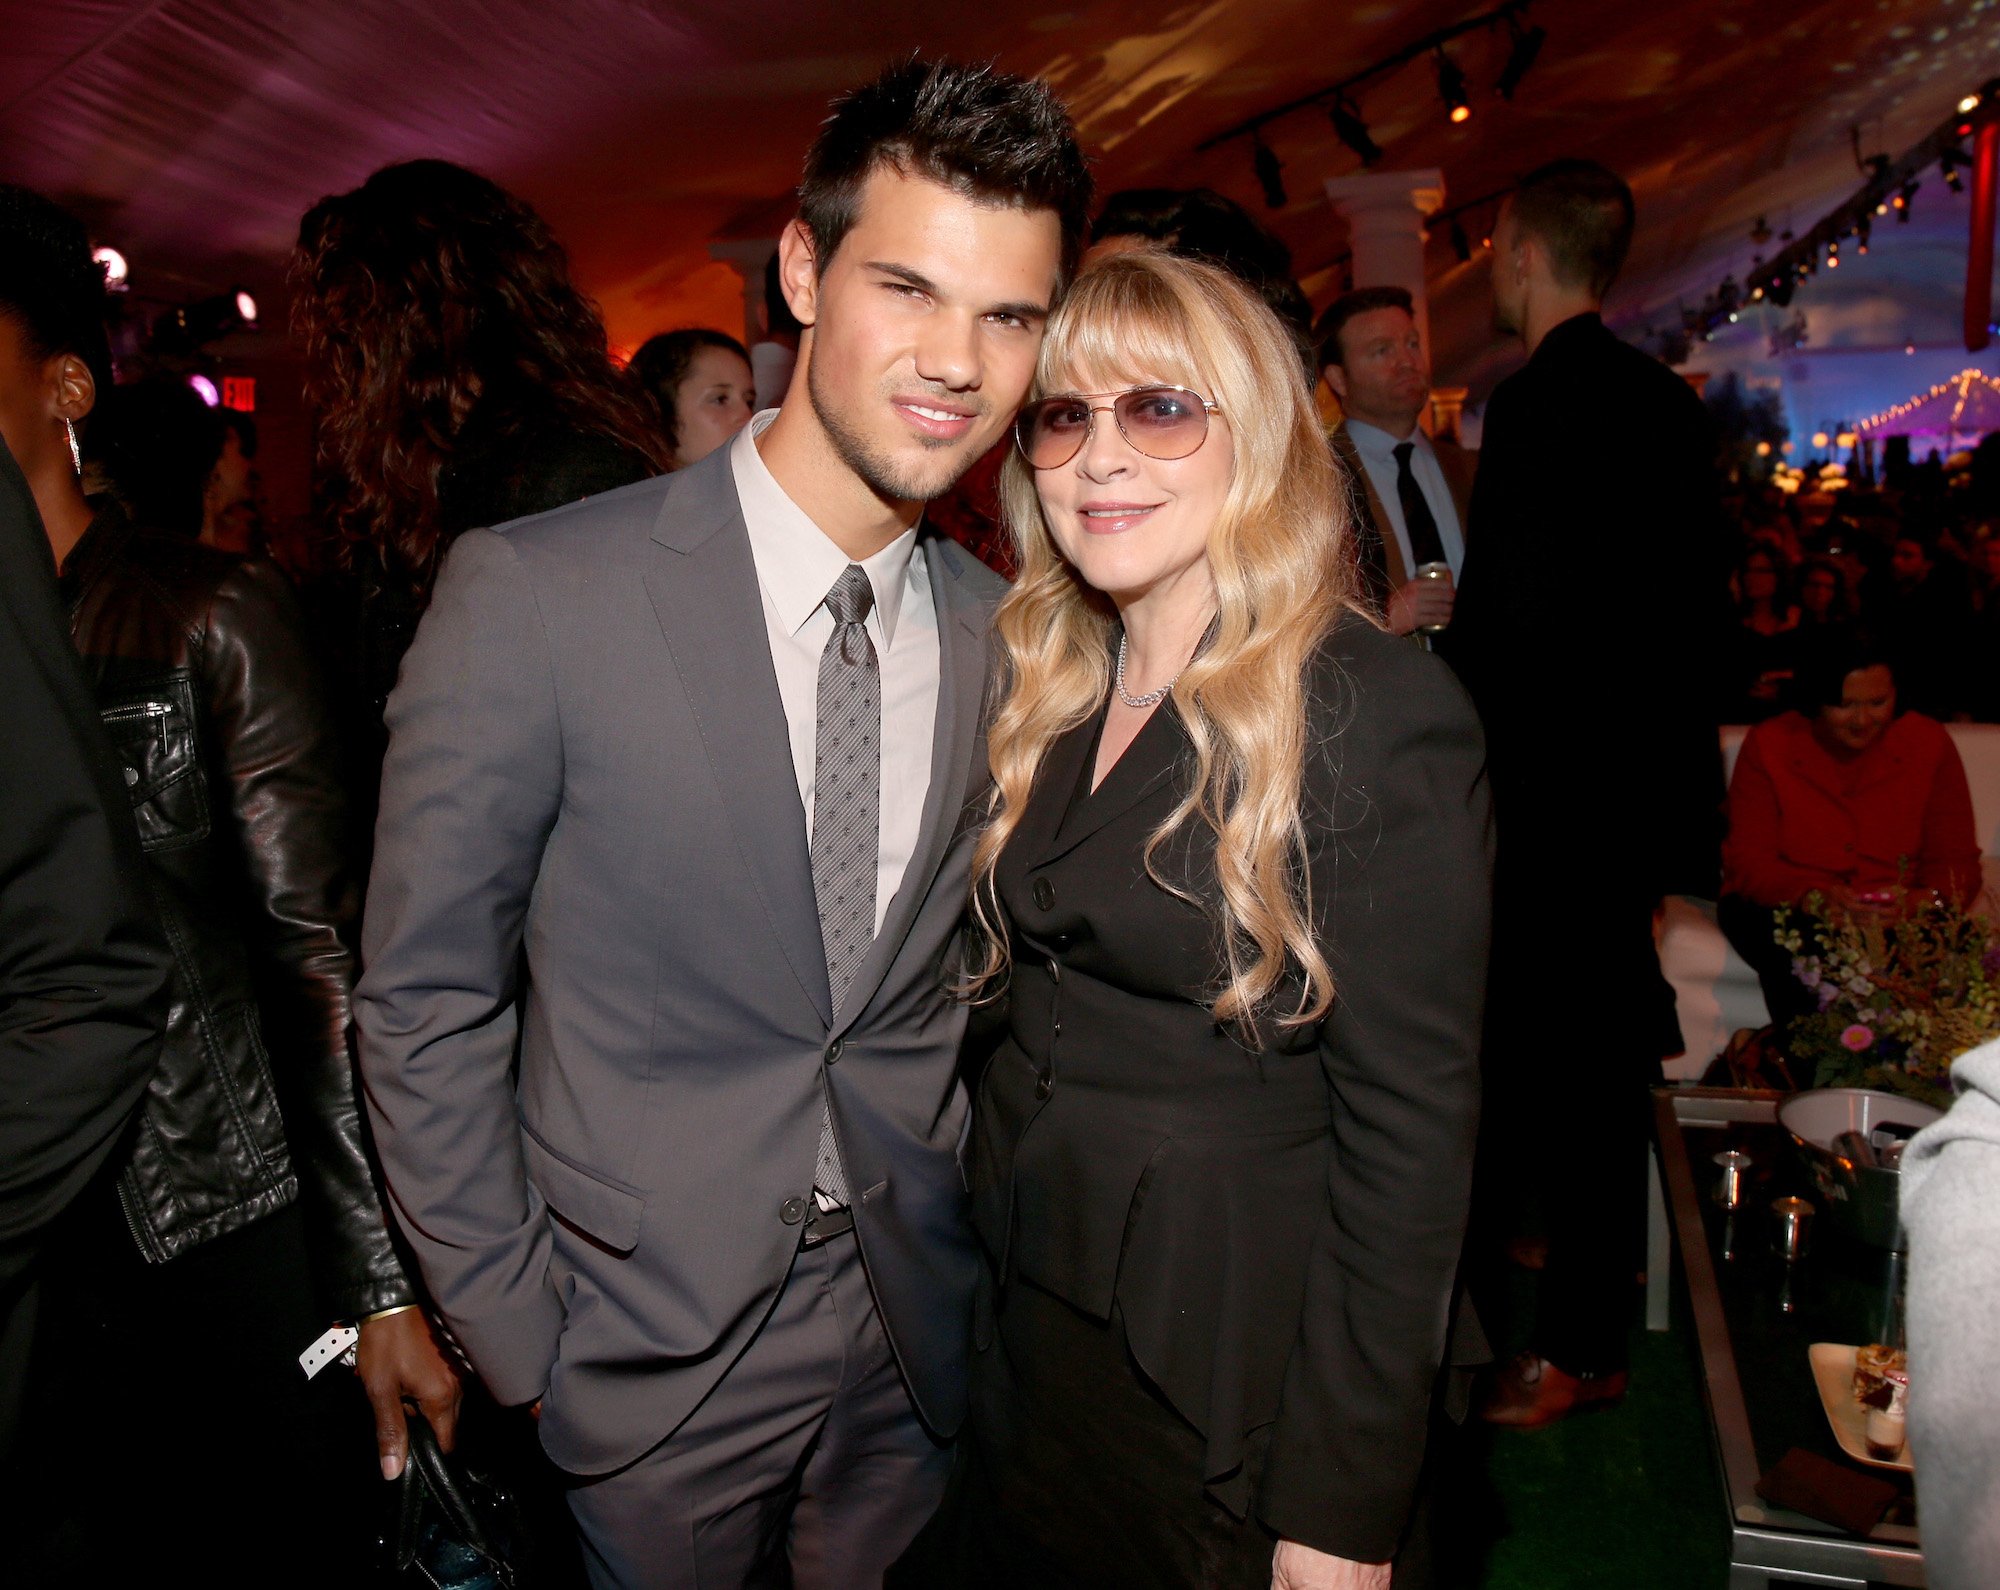 Taylor Lautner and Stevie Nicks at the premiere of 'The Twilight Saga: Breaking Dawn - Part 2' after-party on Nov. 12, 2012.